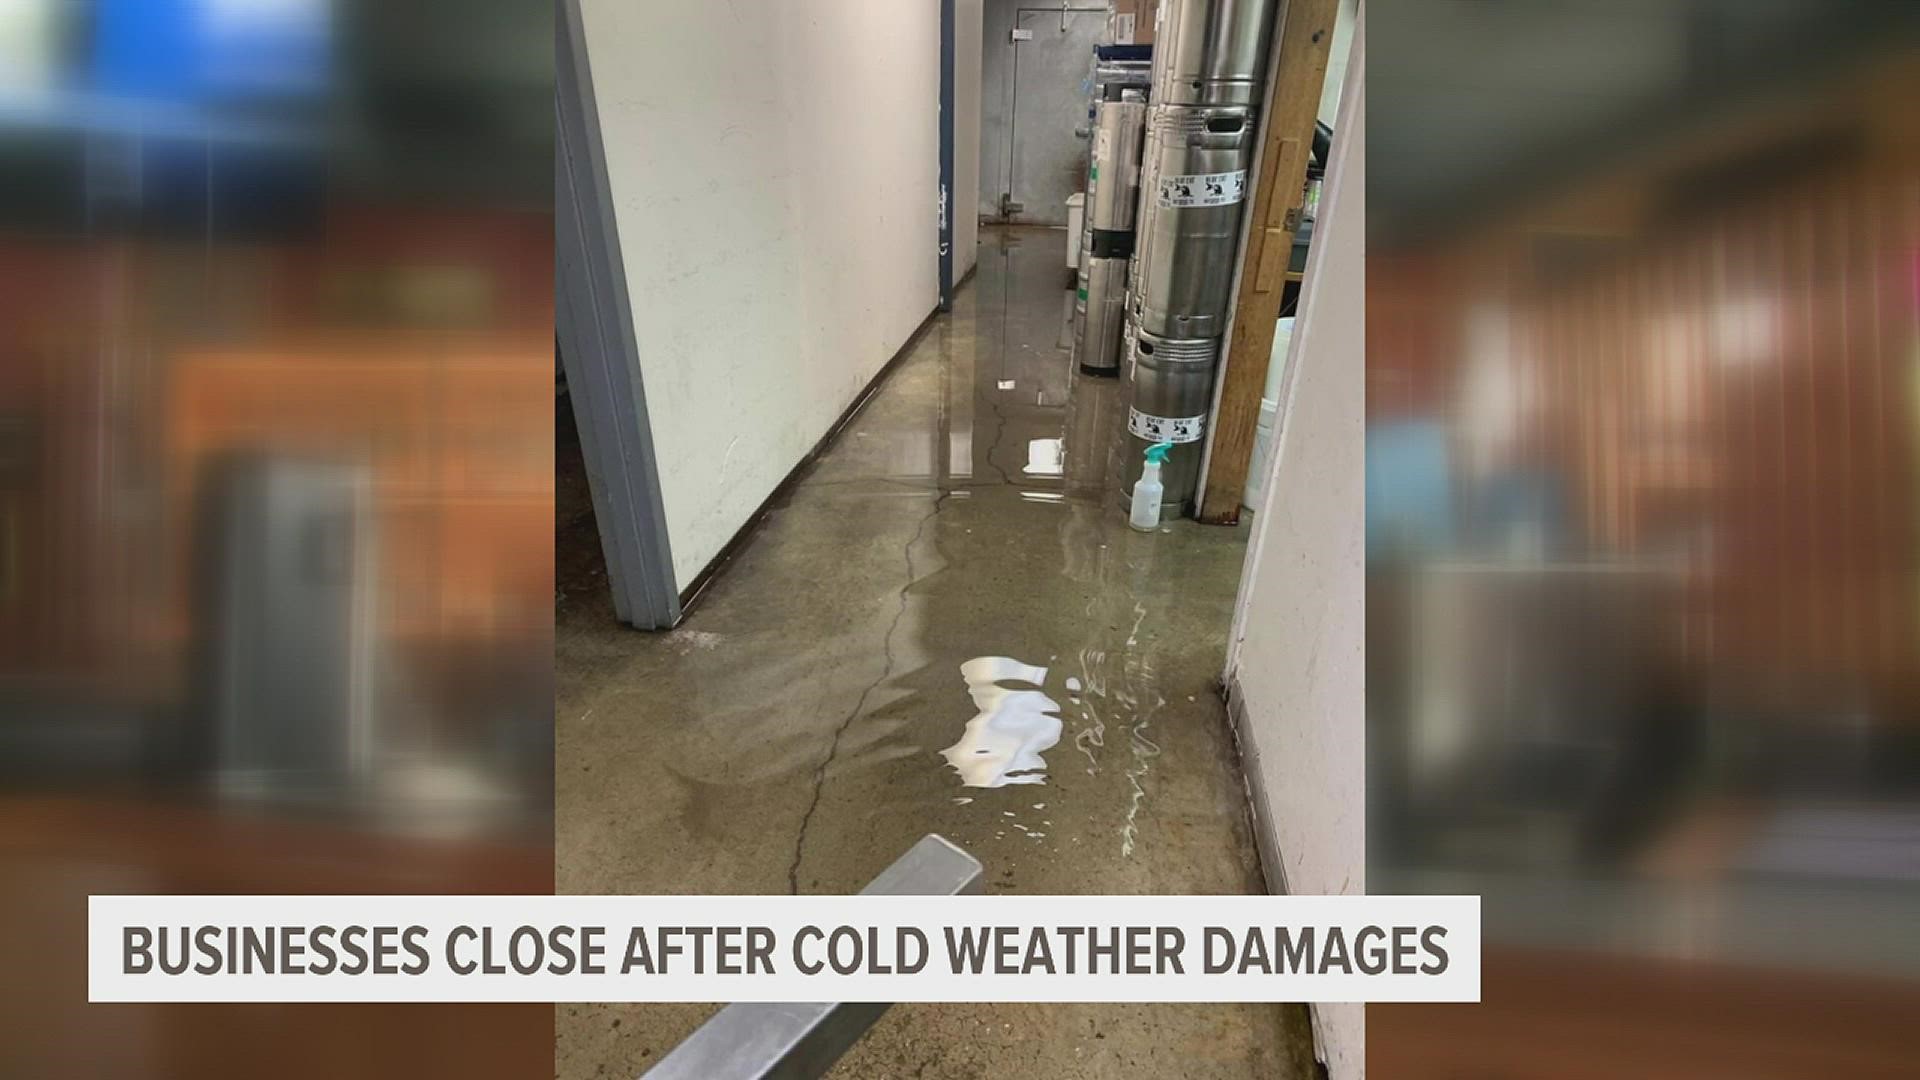 Bier Stube in Moline and Blue Cat Brewing Company in Rock Island are closing their doors after severe weather caused water damage from broken pipes.